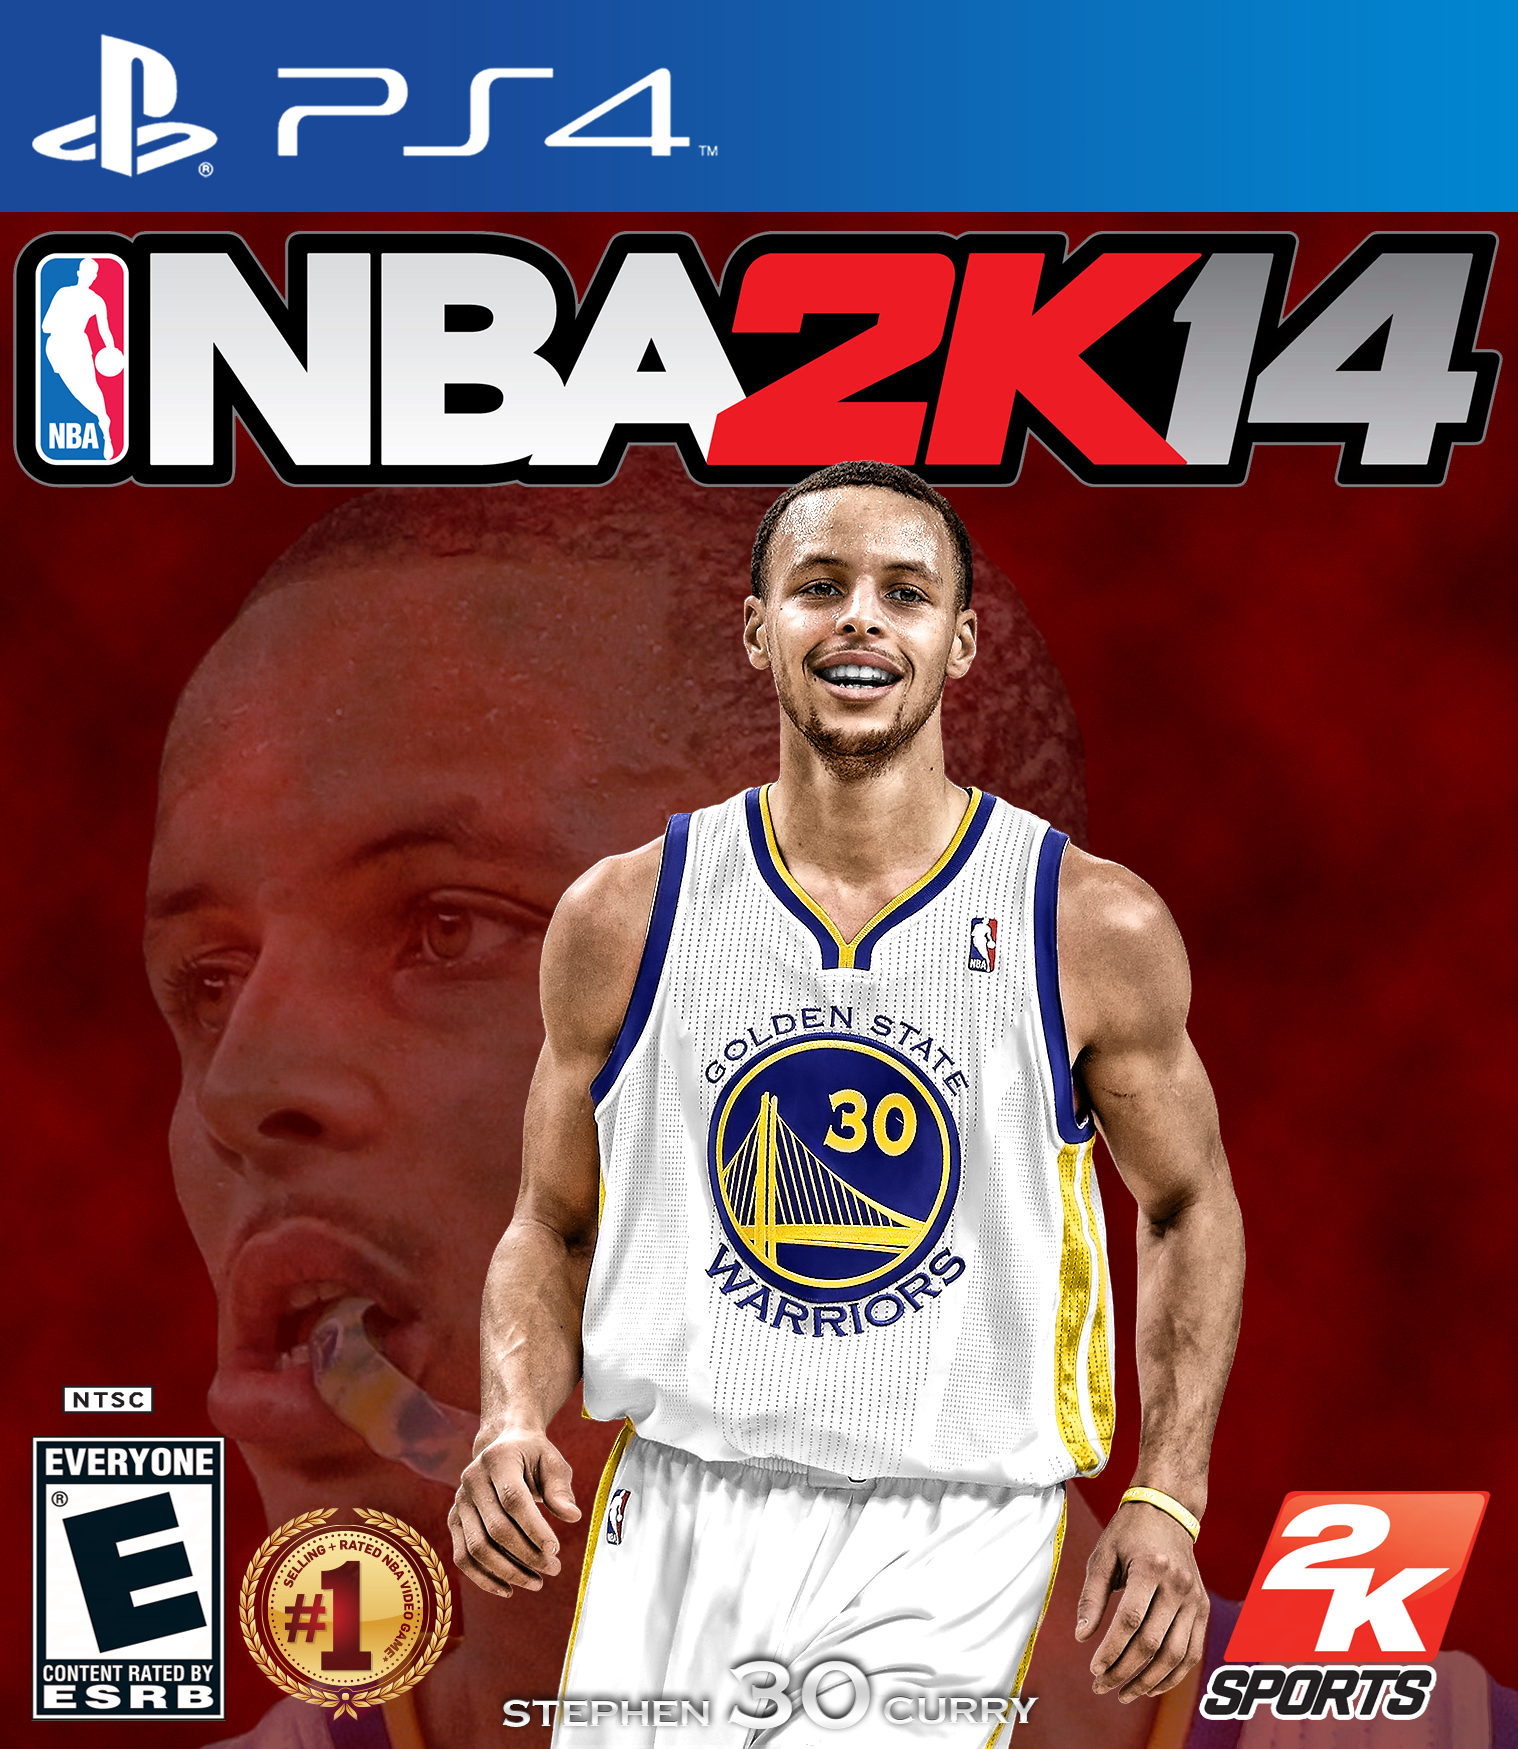 NBA 2K14 Curry cover by chronoxiong on DeviantArt